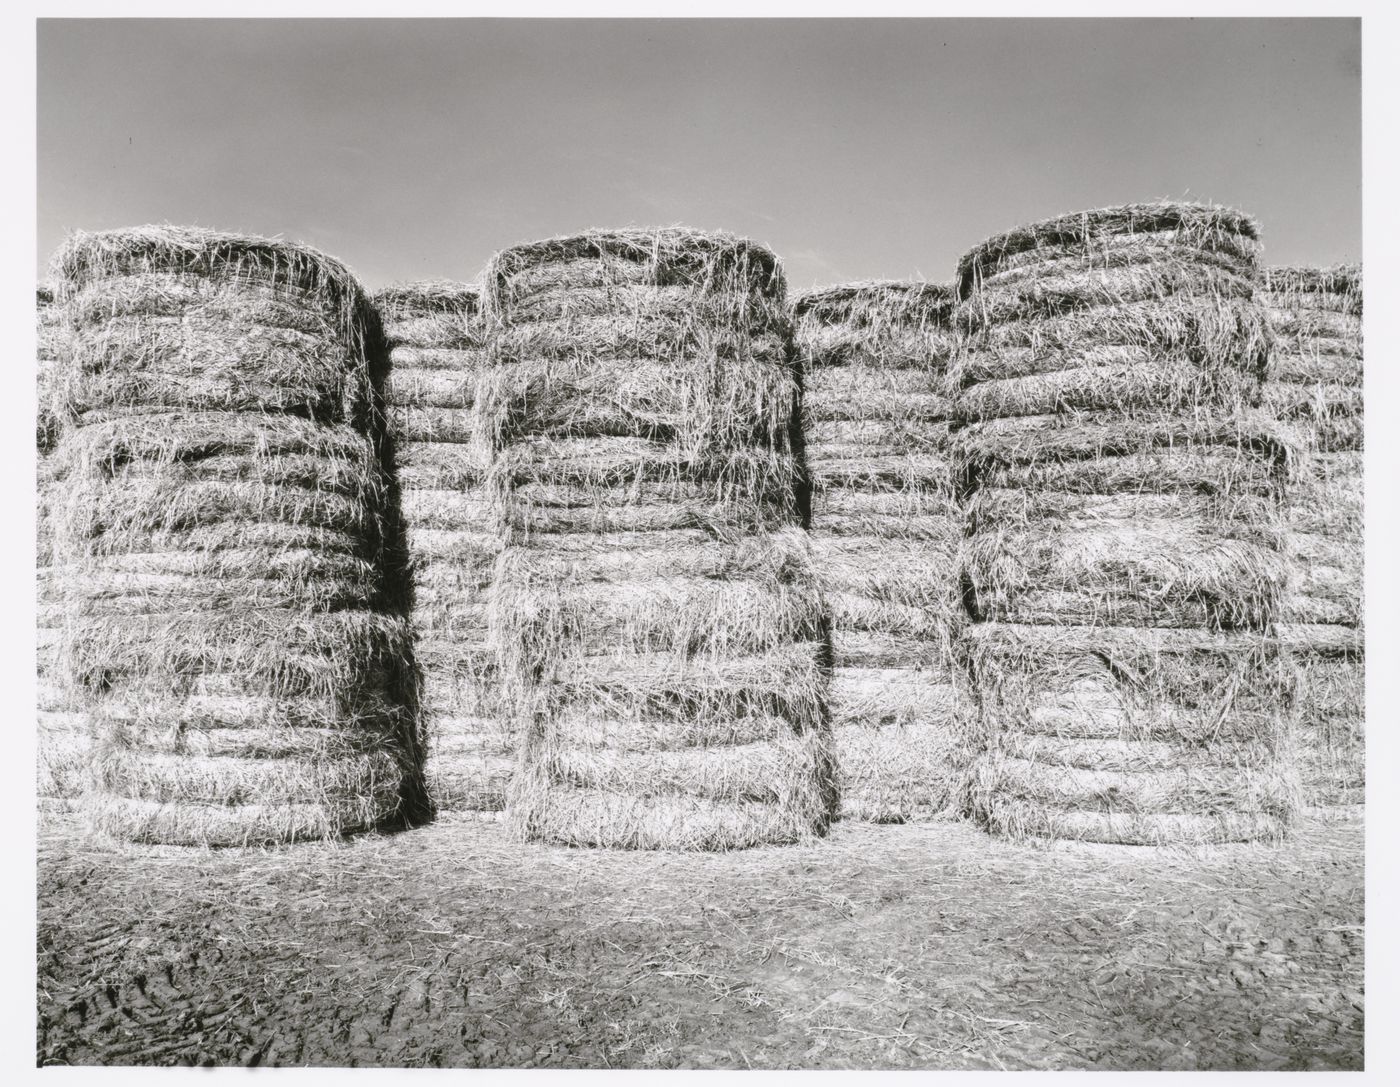 View of rolled bales of straw stacked vertically, Hamburg, Germany